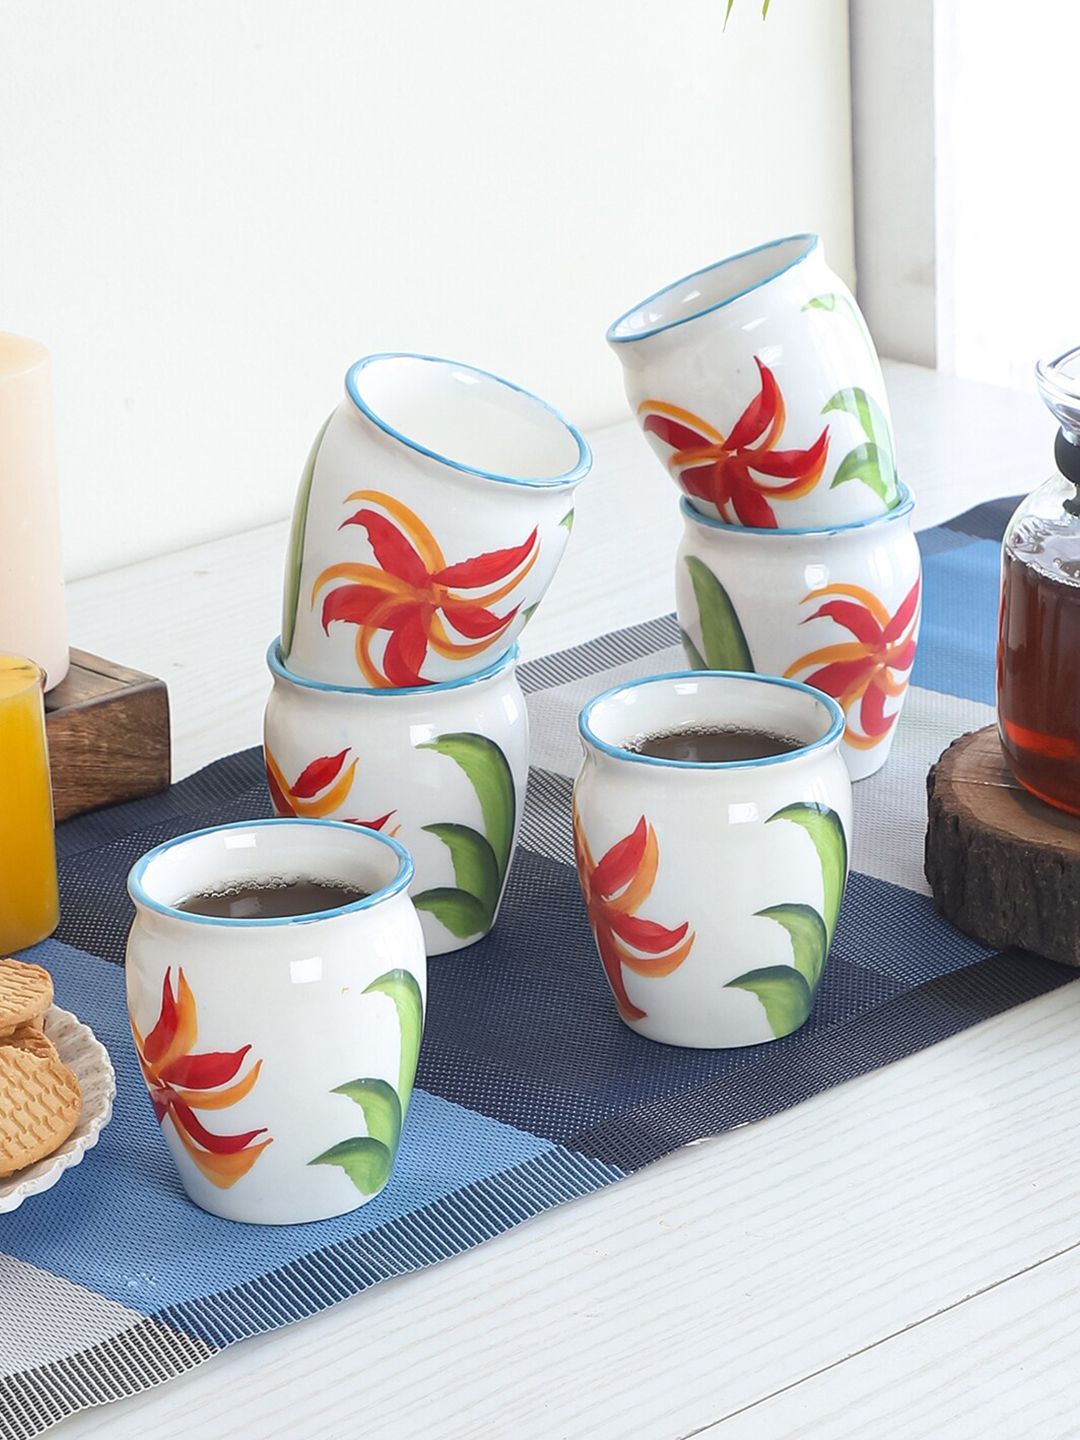 CDI White & Red Printed Ceramic Matte Cups Set of 6 Handcrafted Tea Kullar Cups Price in India